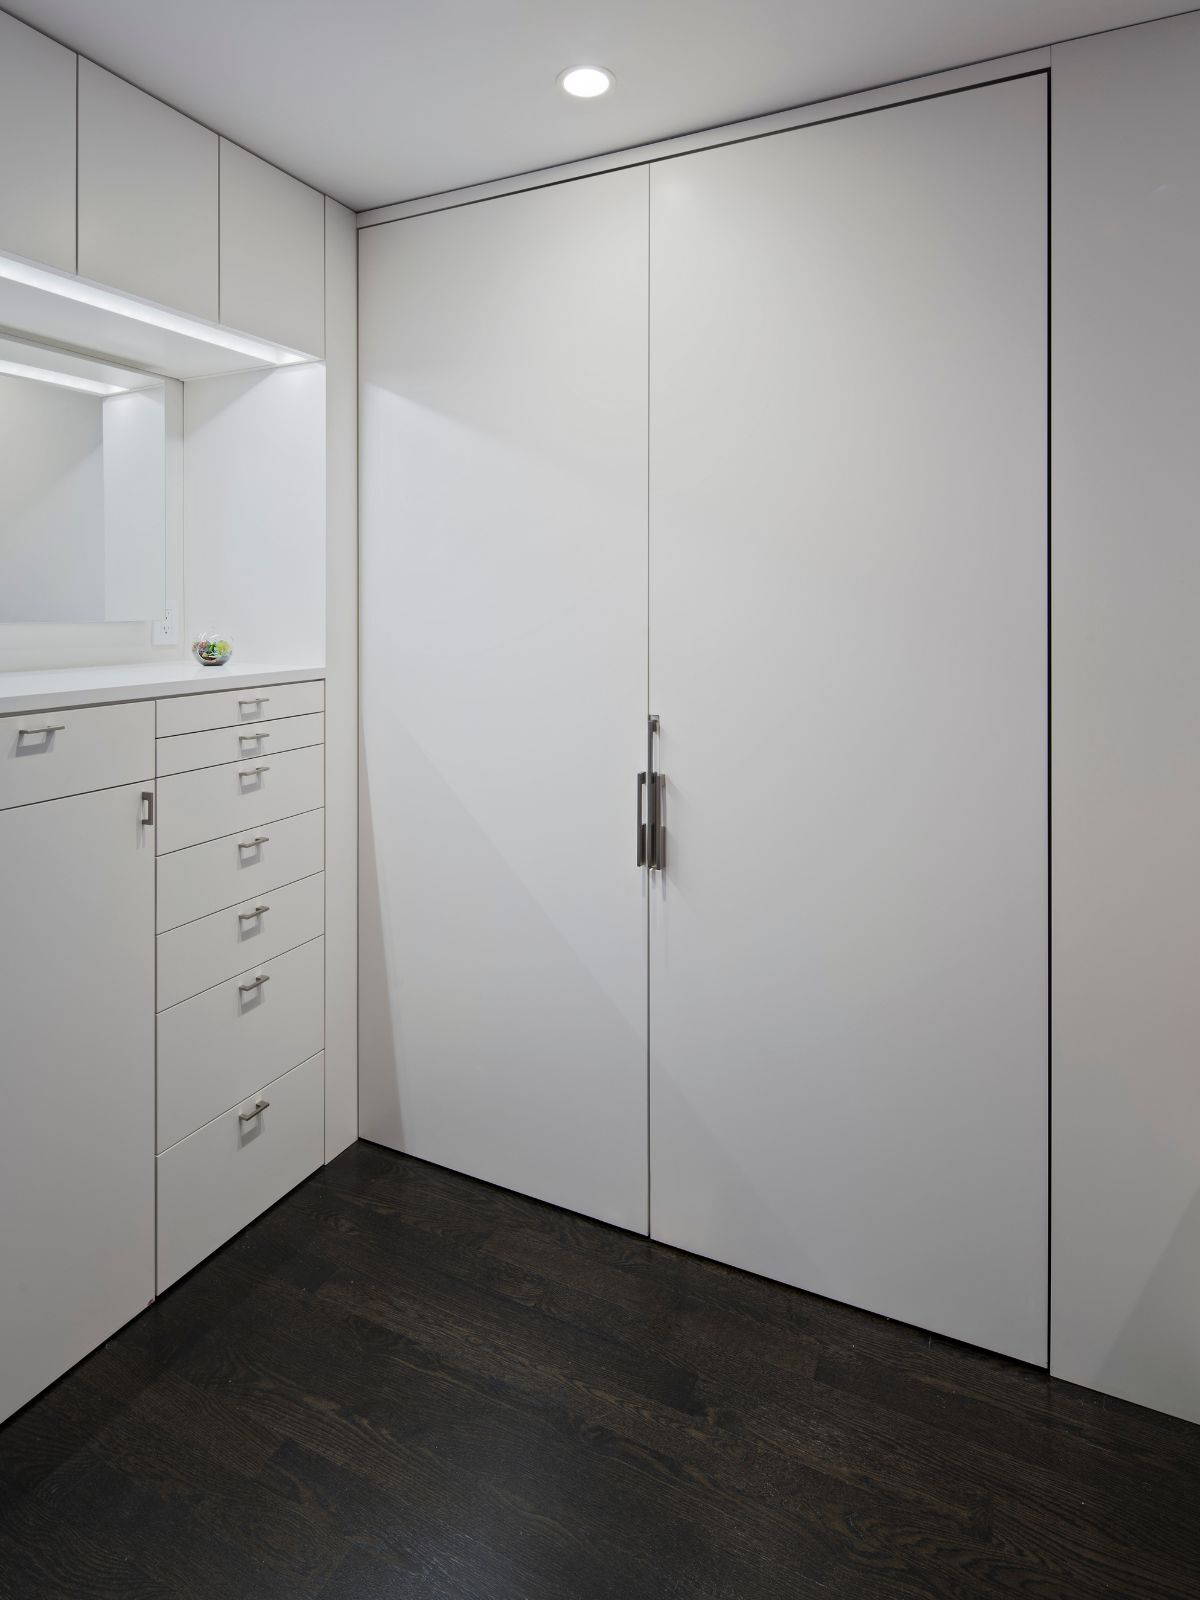 A floor-to-ceiling built-in closet with sizeable flat panel doors and a multi-drawer built-in dresser is set off against an almost-black floor.